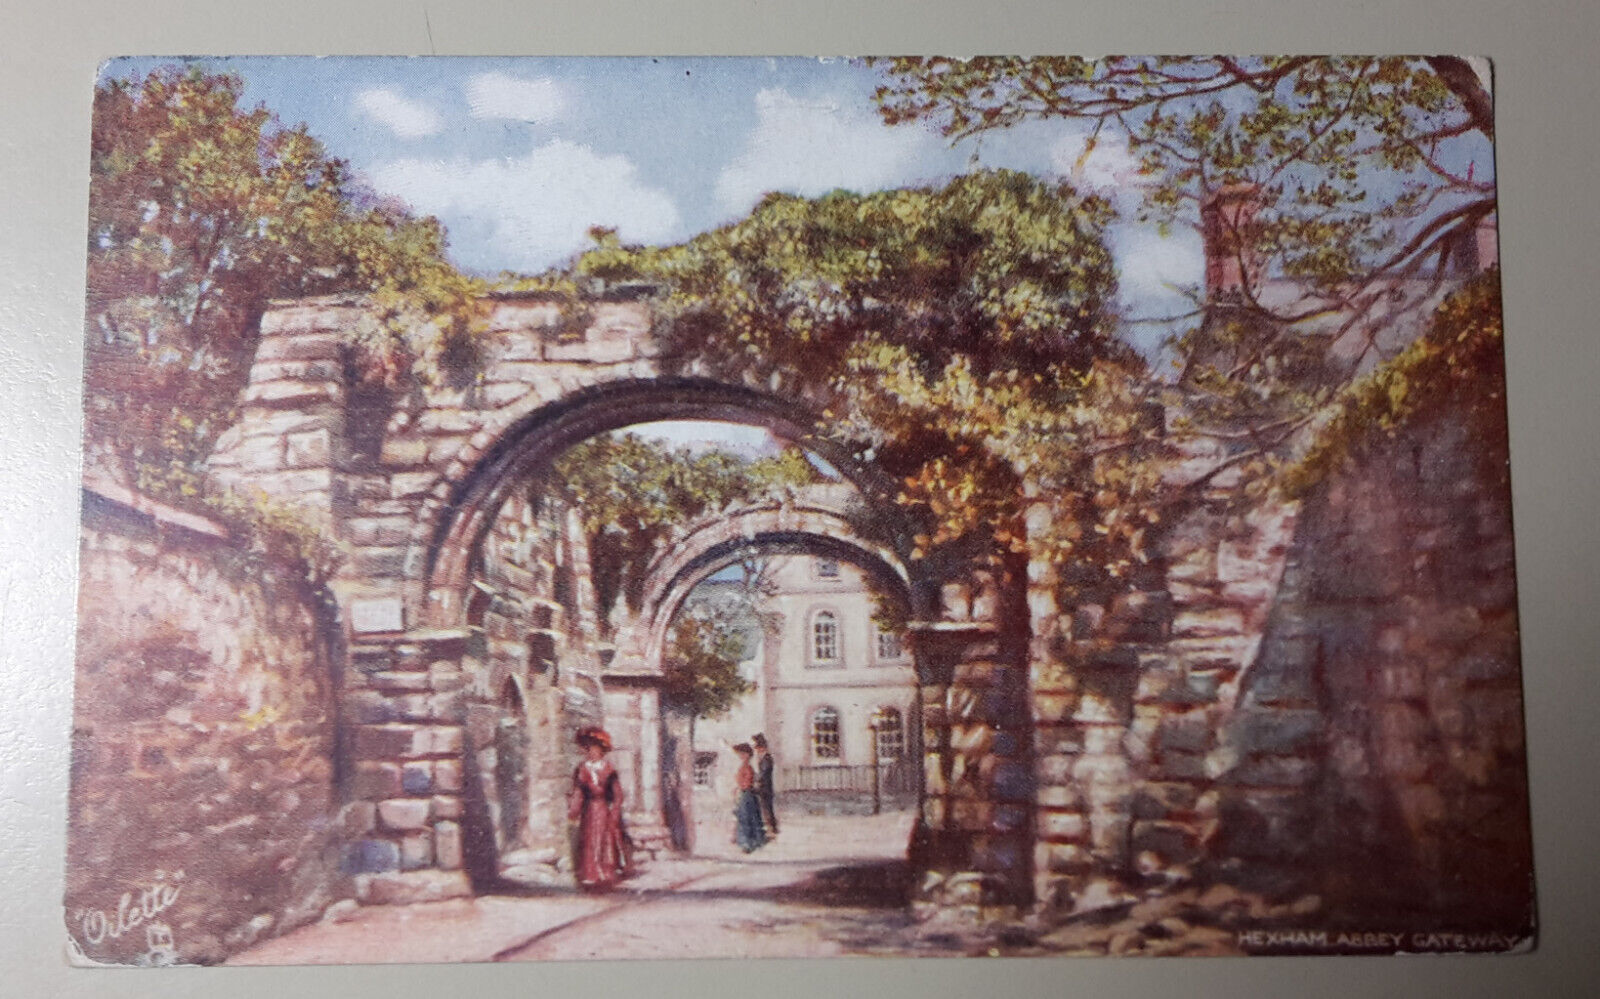 House Clearance - TUCKS OILETTE SERIES HEXHAM THE ABBEY GATEWAY CARD NO 7027 USED HEXHAM CANCEL